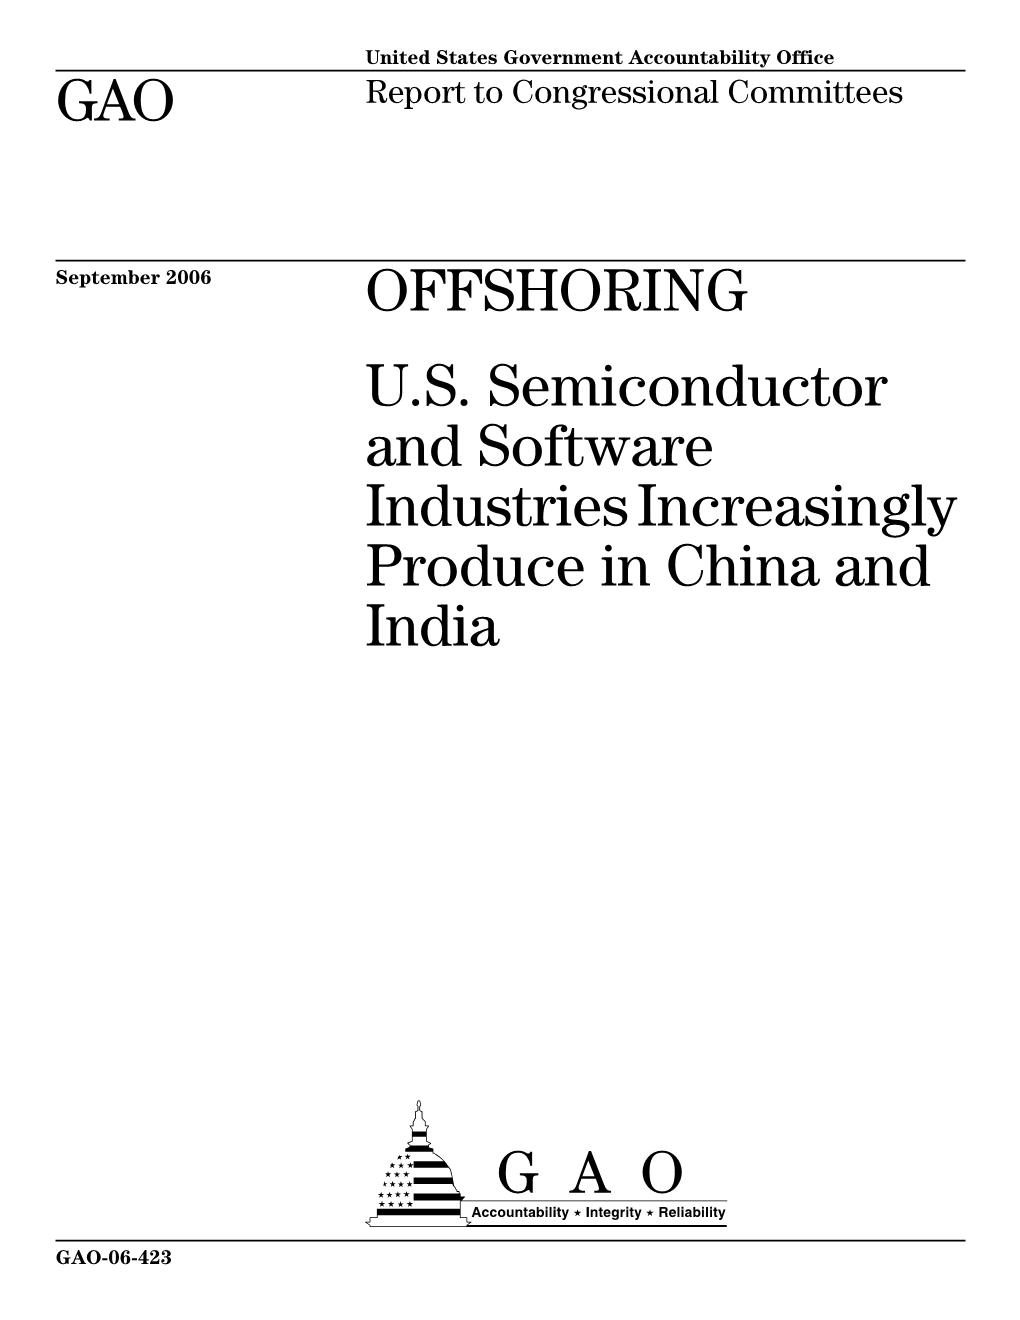 GAO-06-423 Offshoring: U.S. Semiconductor and Software